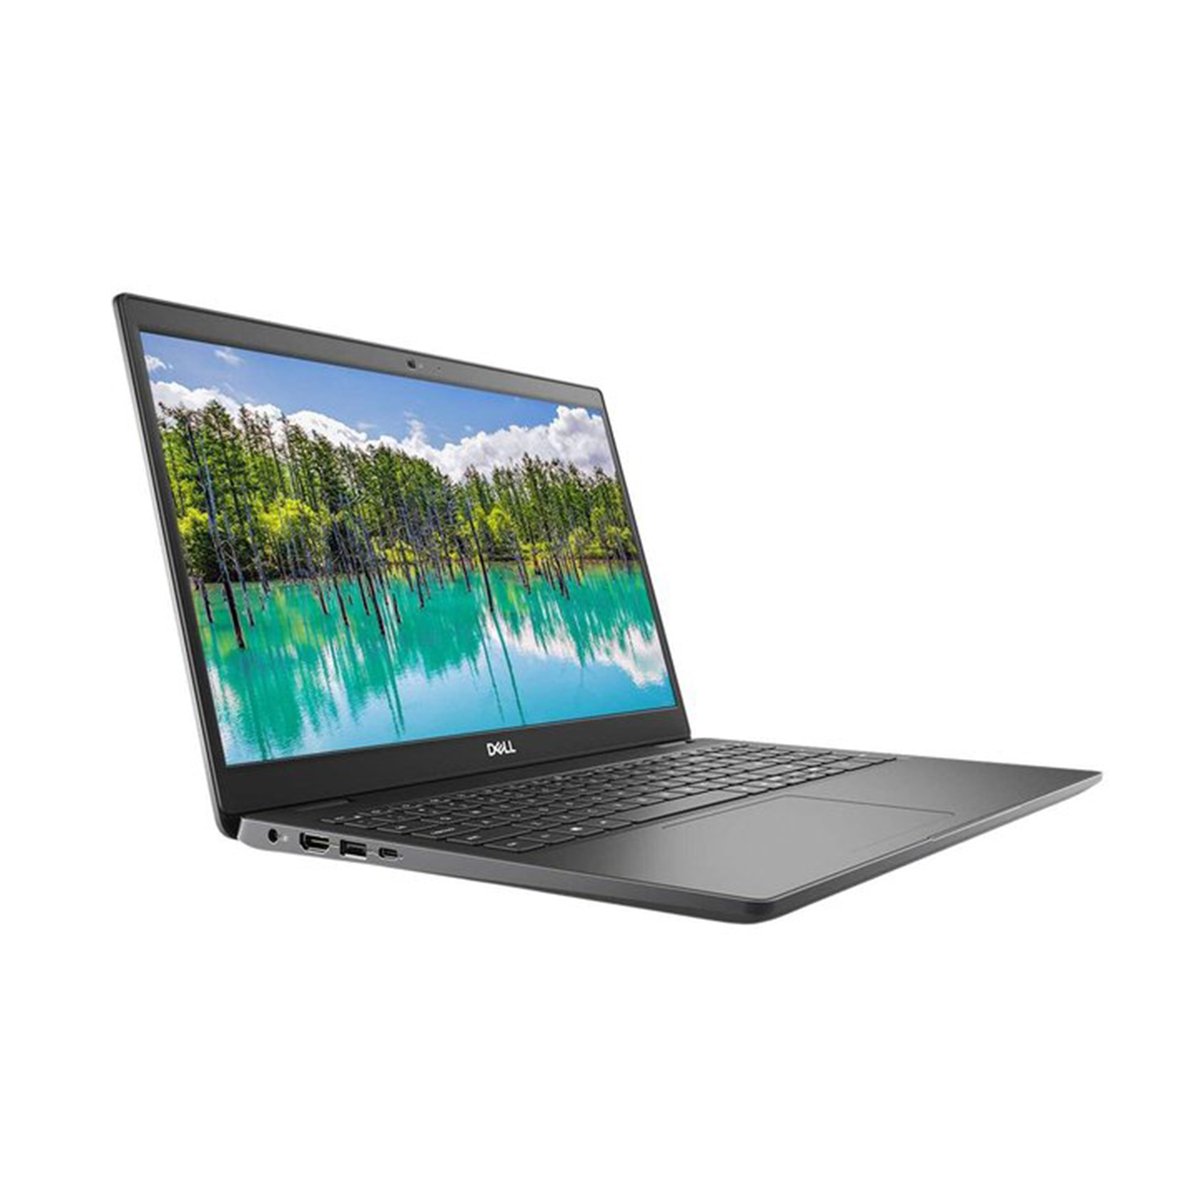 Dell Vostro 3510(3510-VOS-8060)Laptop,Core i5-1135G7,8GB RAM,1TB HDD,Intel Iris Xe Graphics with shared graphics memory,Win10,15.6inch HD Black,English/Arabic Keyboard